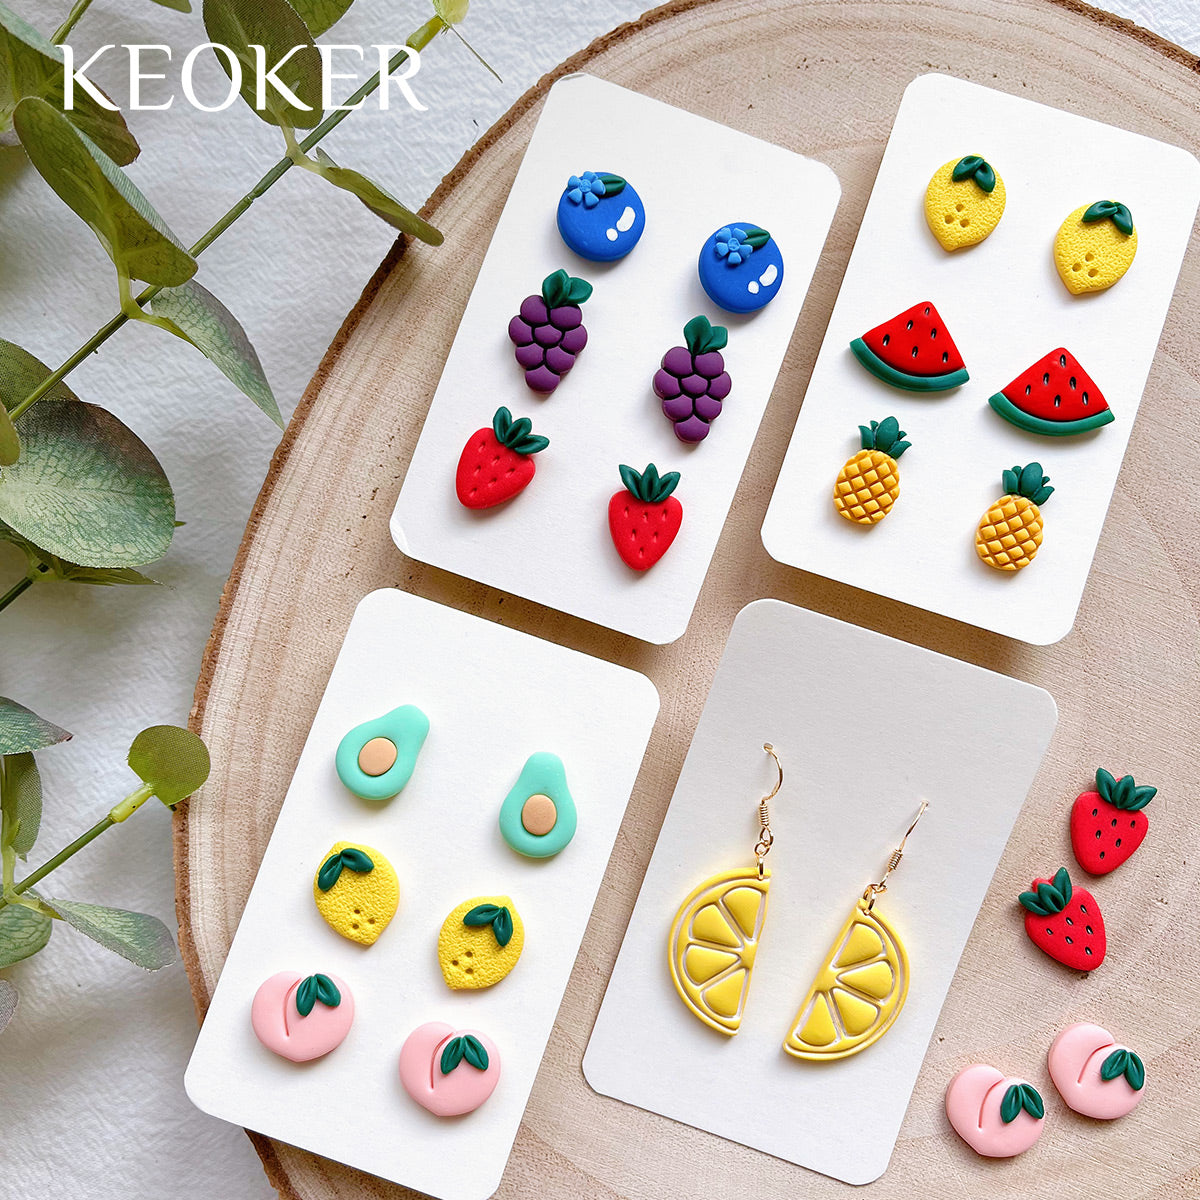 KEOKER Fruit Clay Cutters for Polymer Clay Jewelry(12 Shapes)